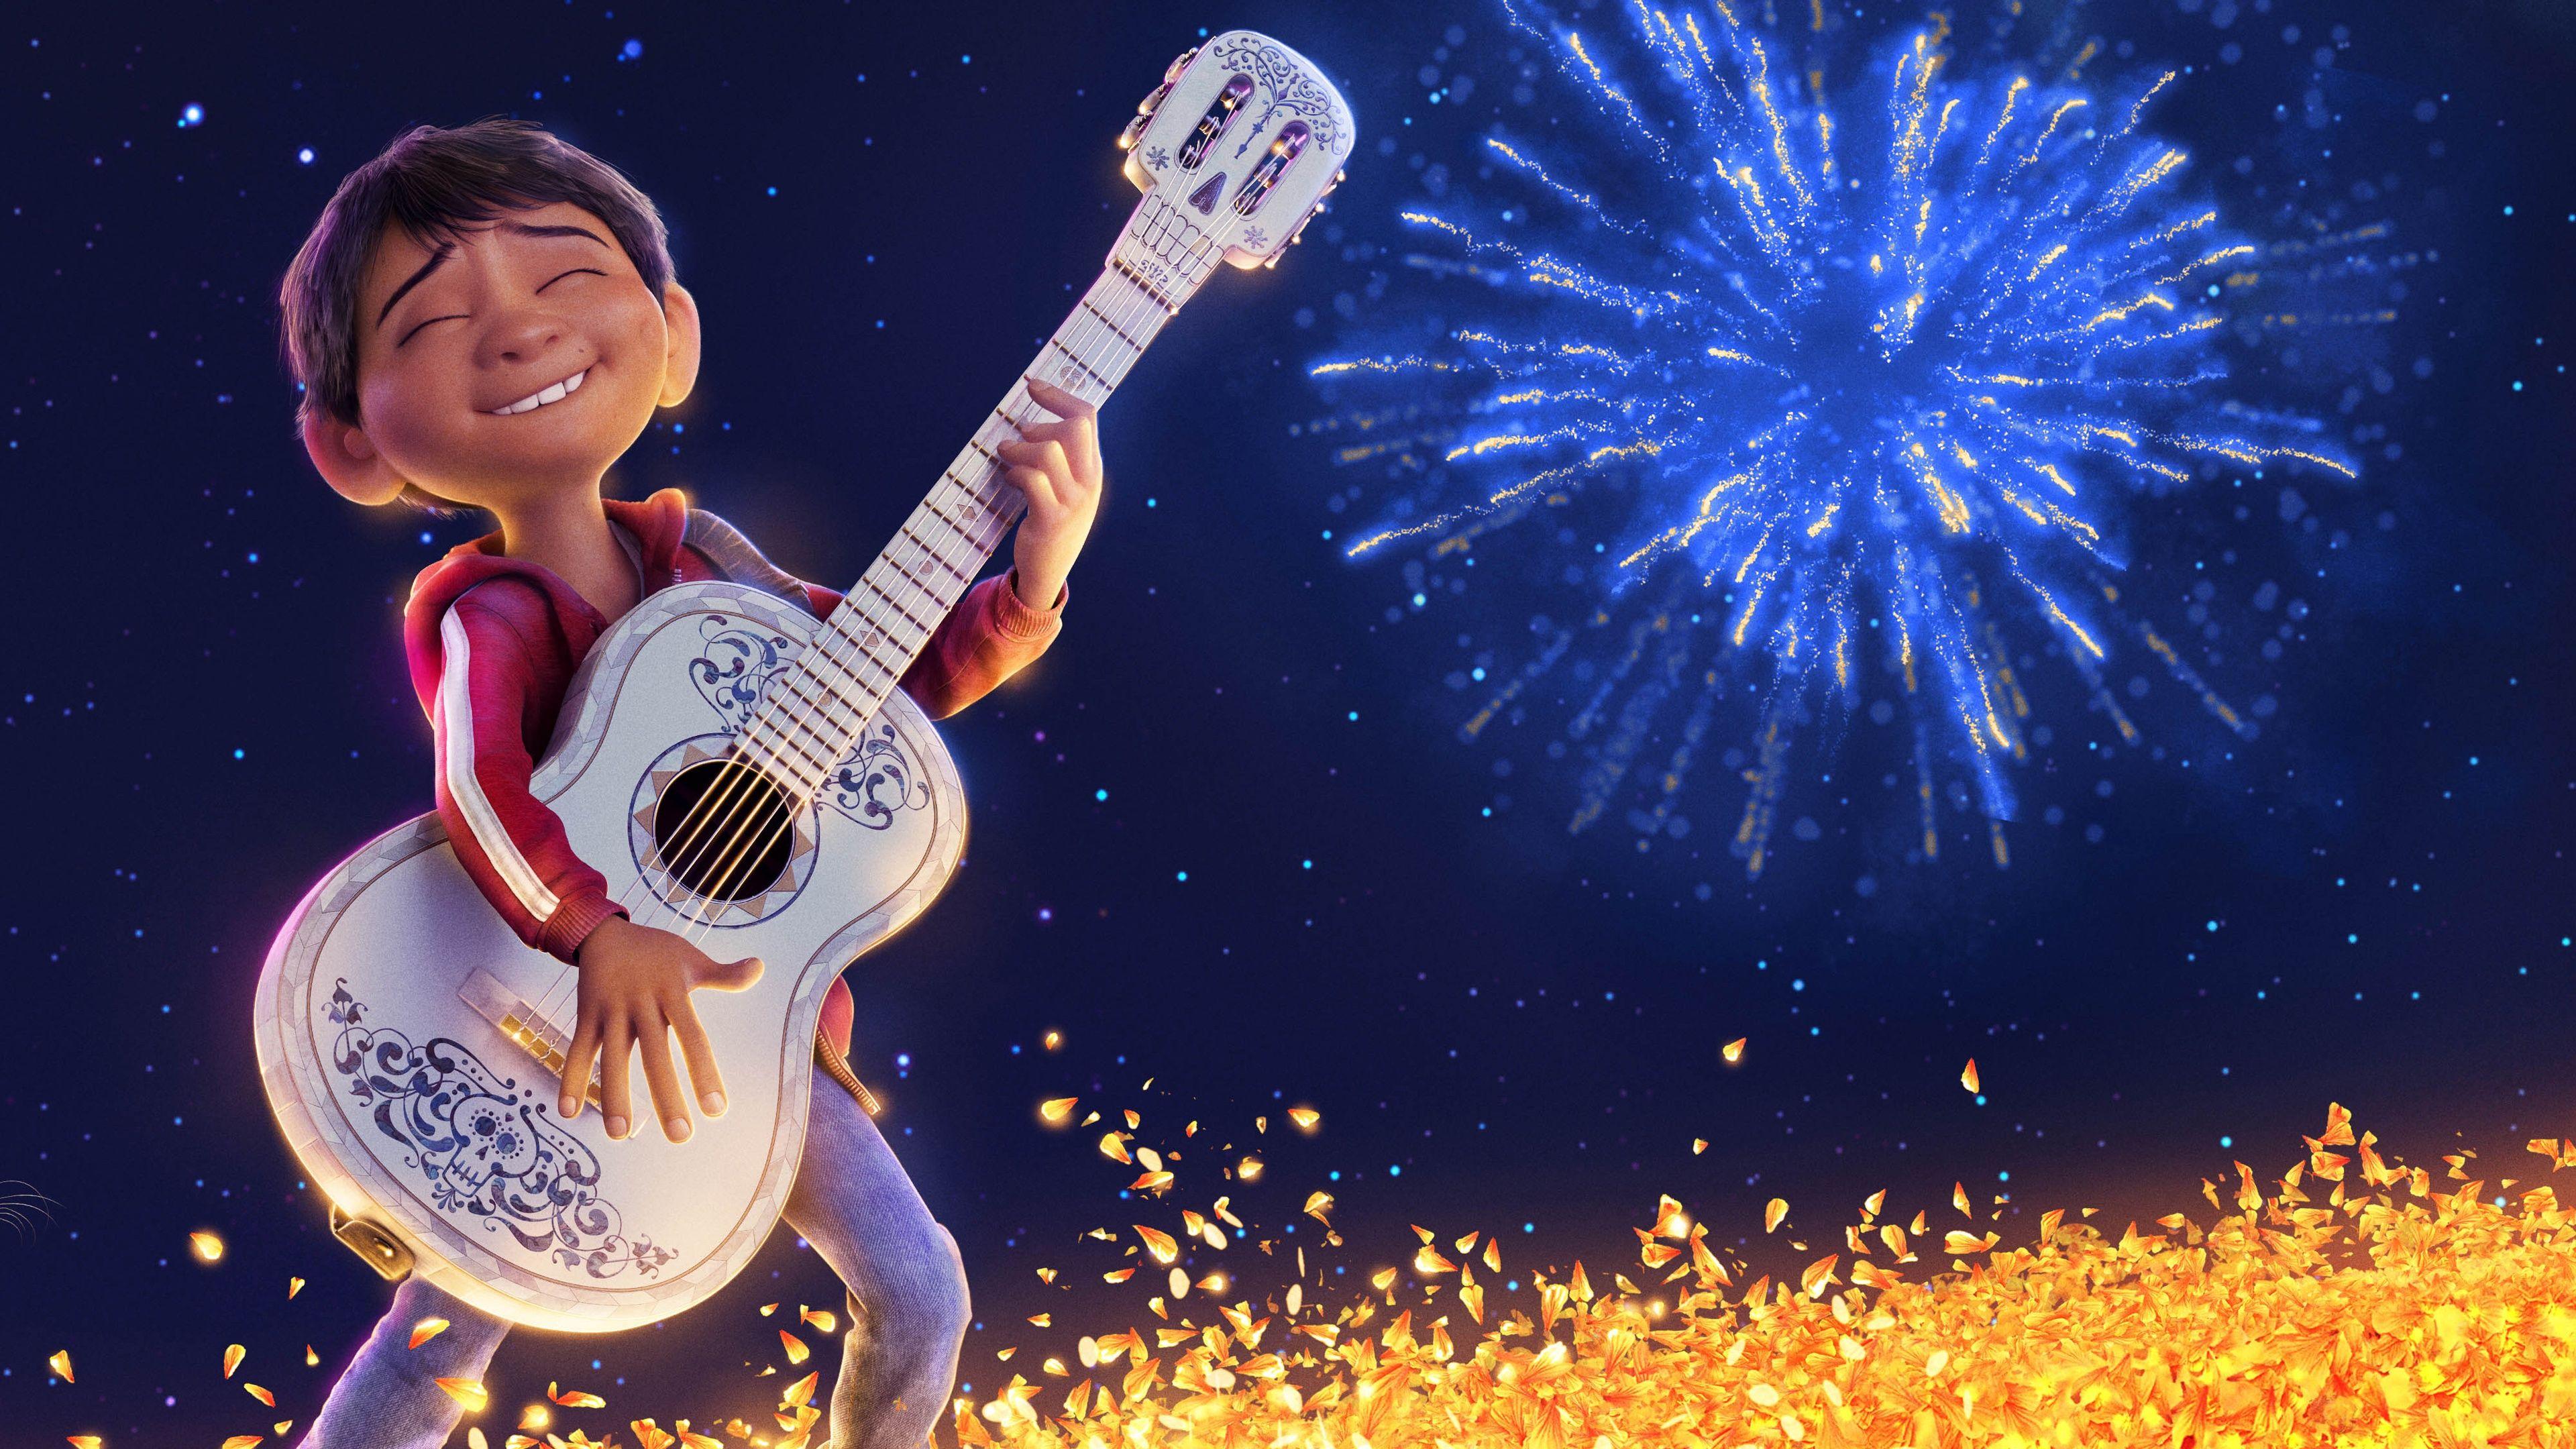 UHD 4K Coco Miguel Playing Guitar Animated Movie